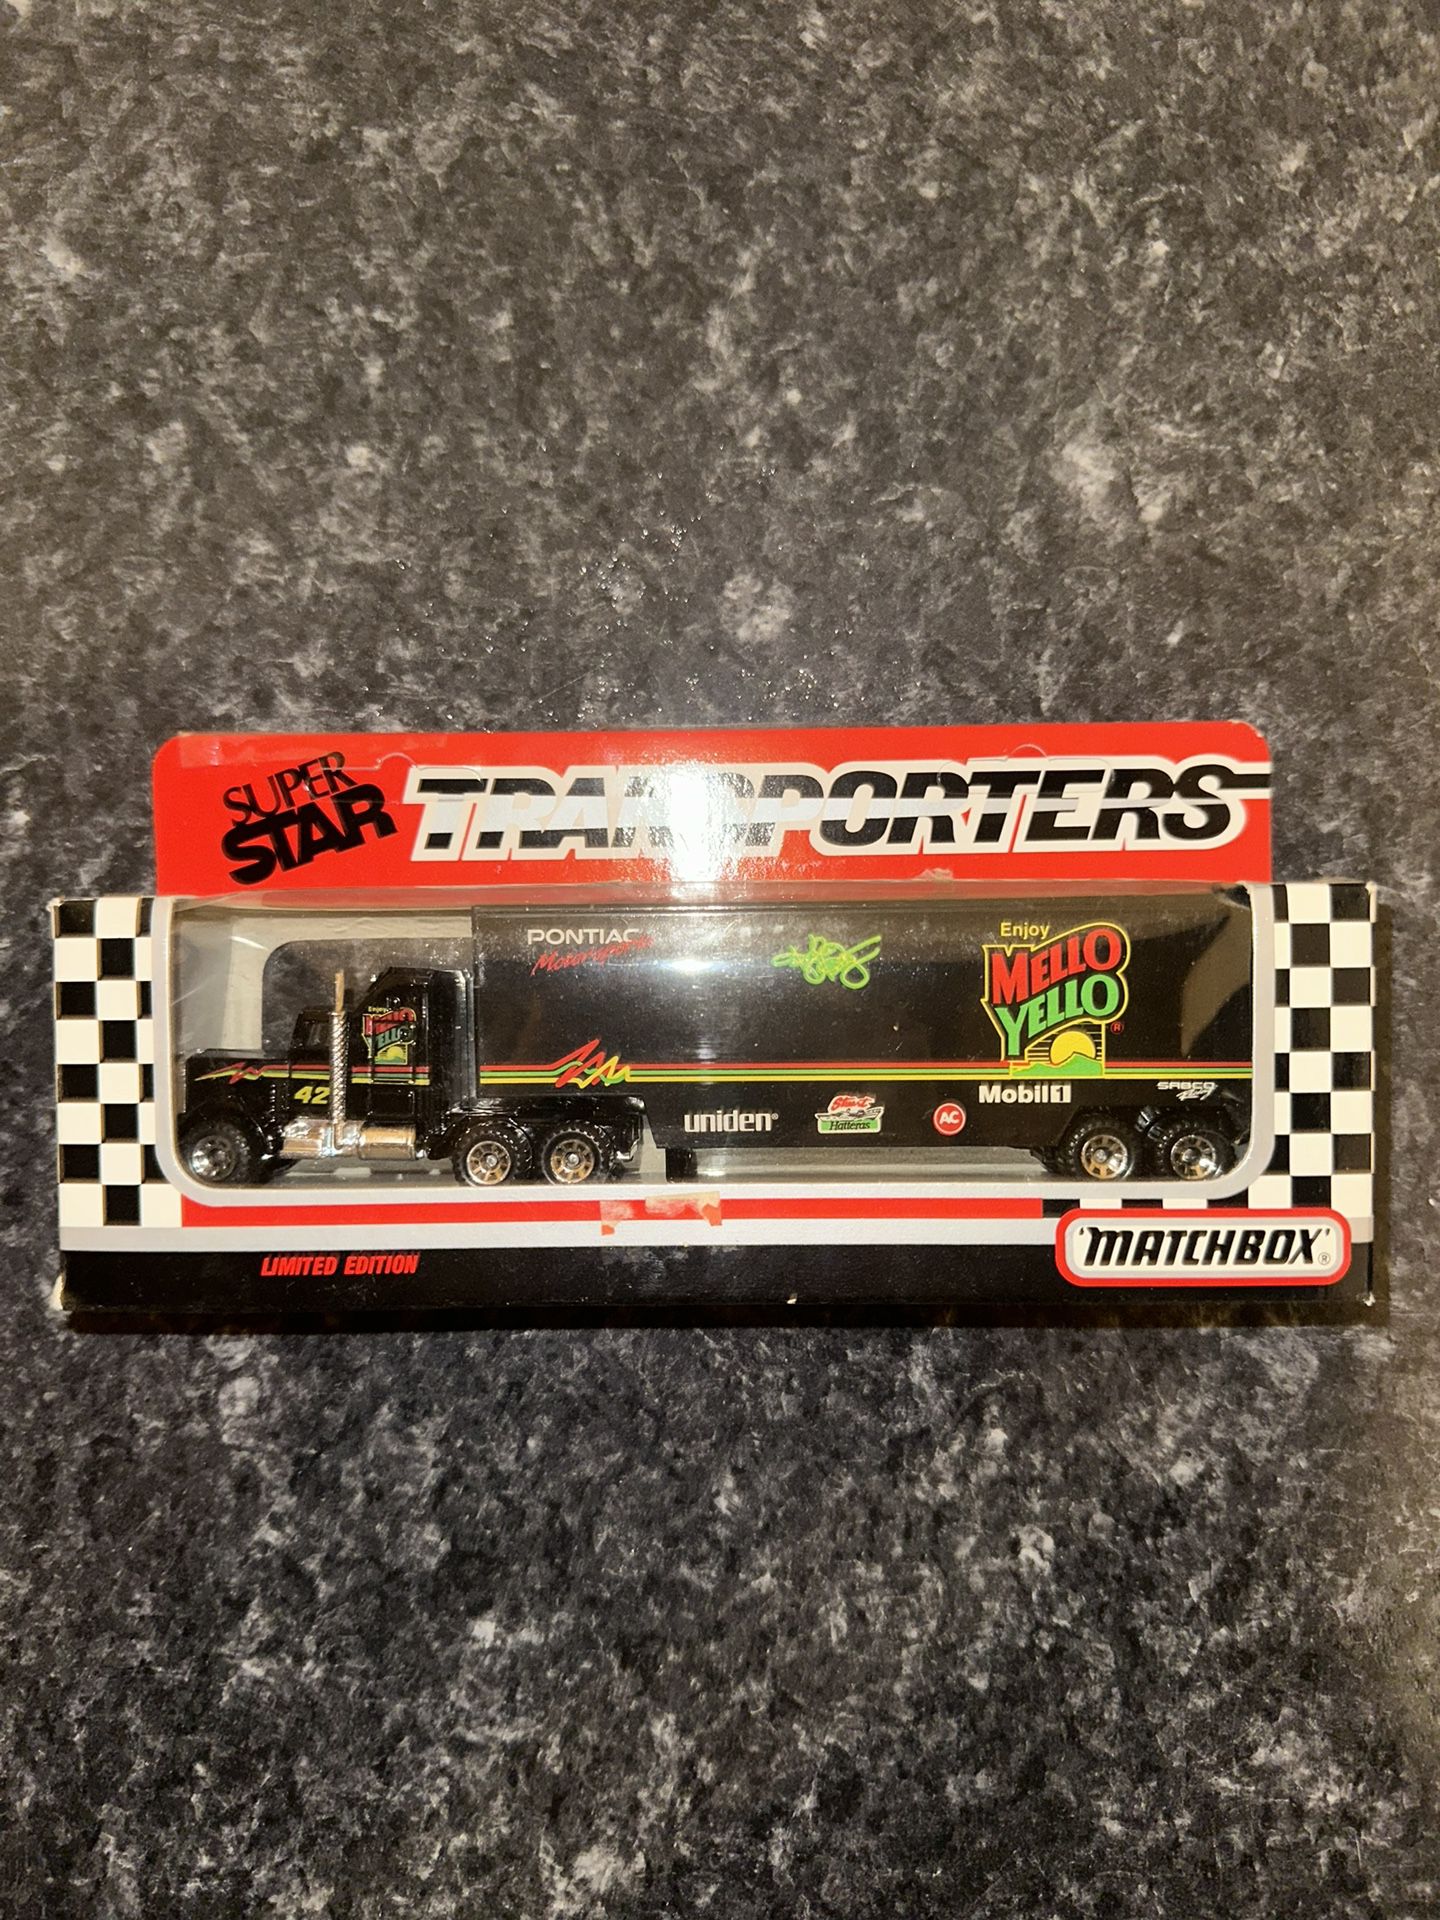 Kyle Petty collectors limited edition toy hauler 